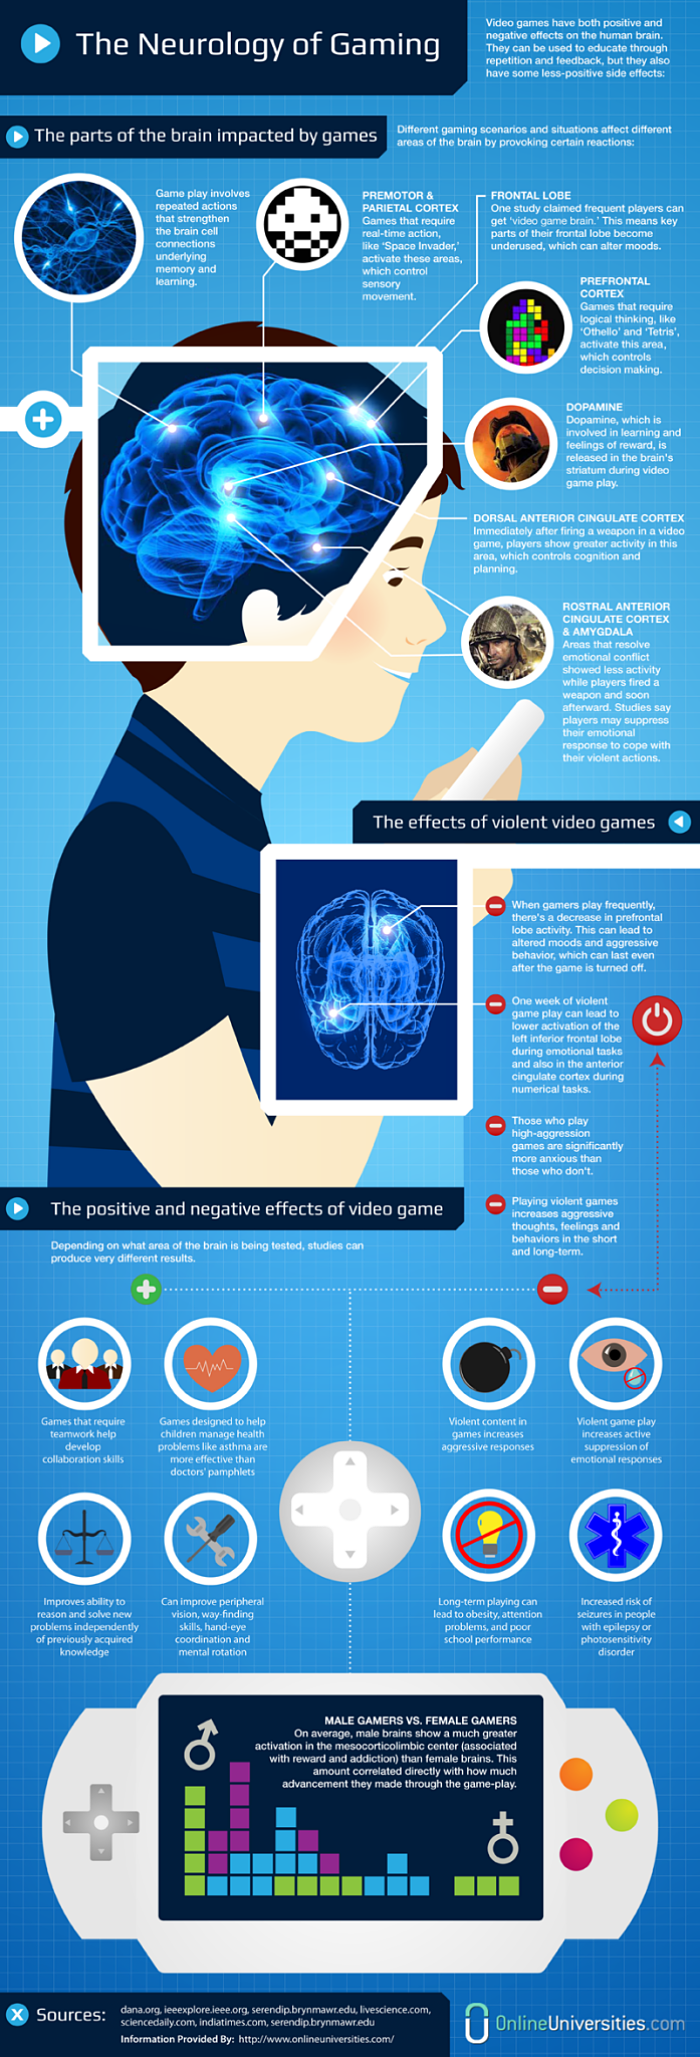 Video Games Are Good For Your Brain [Infographic]